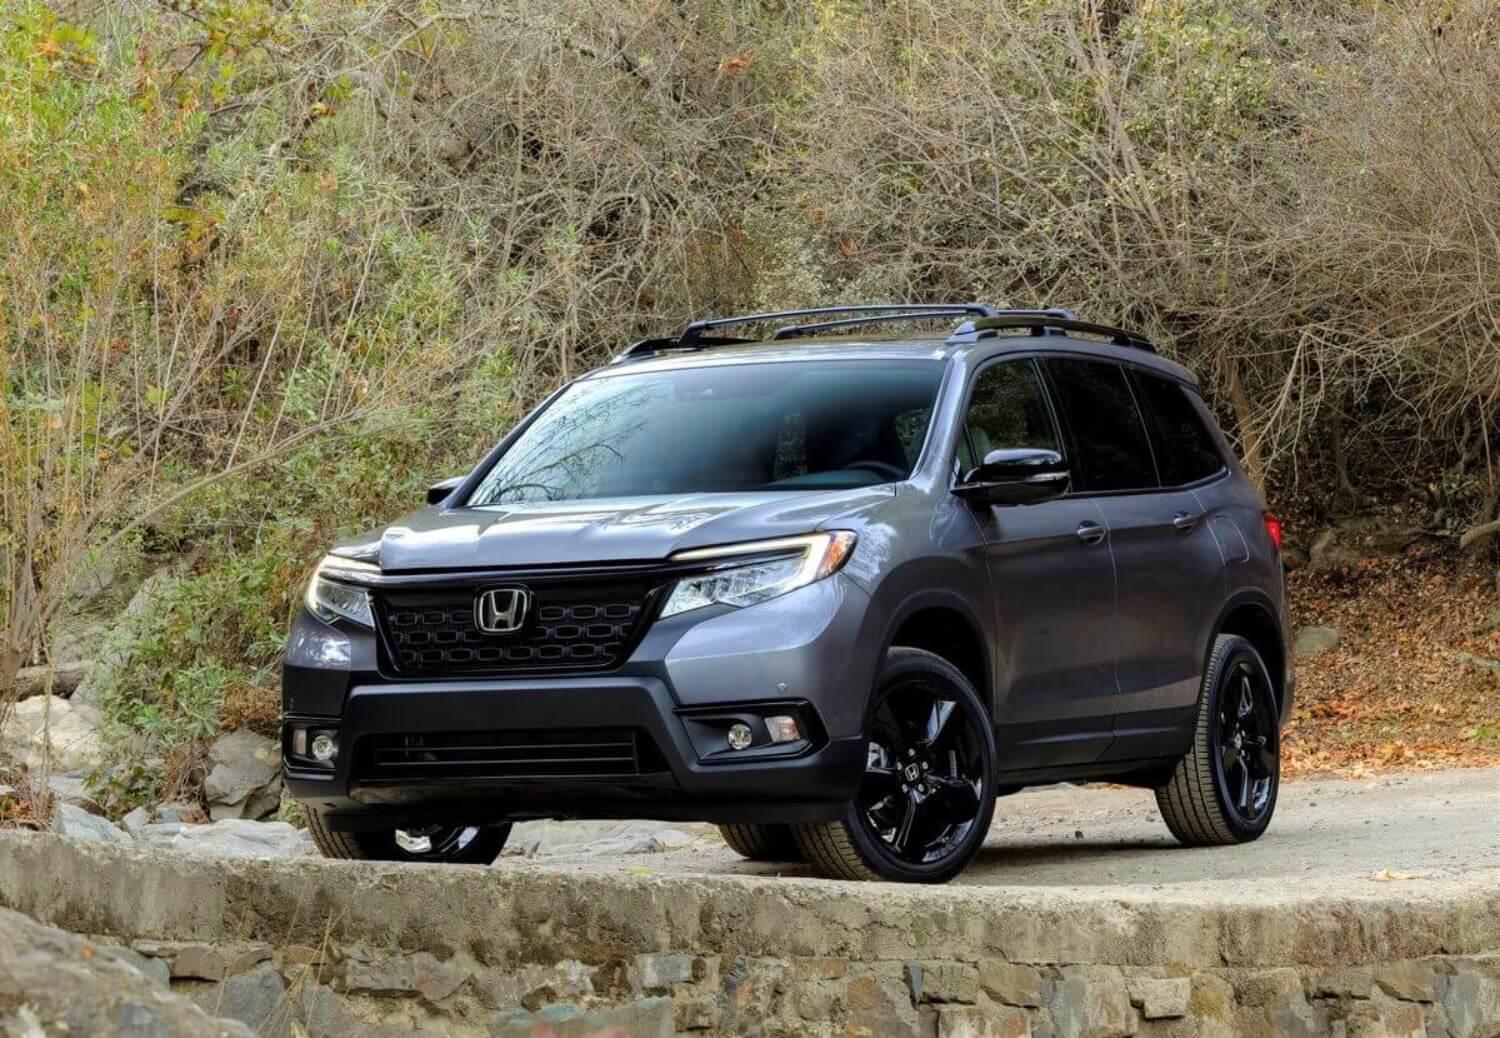 The most common Honda Passport problems for this SUV